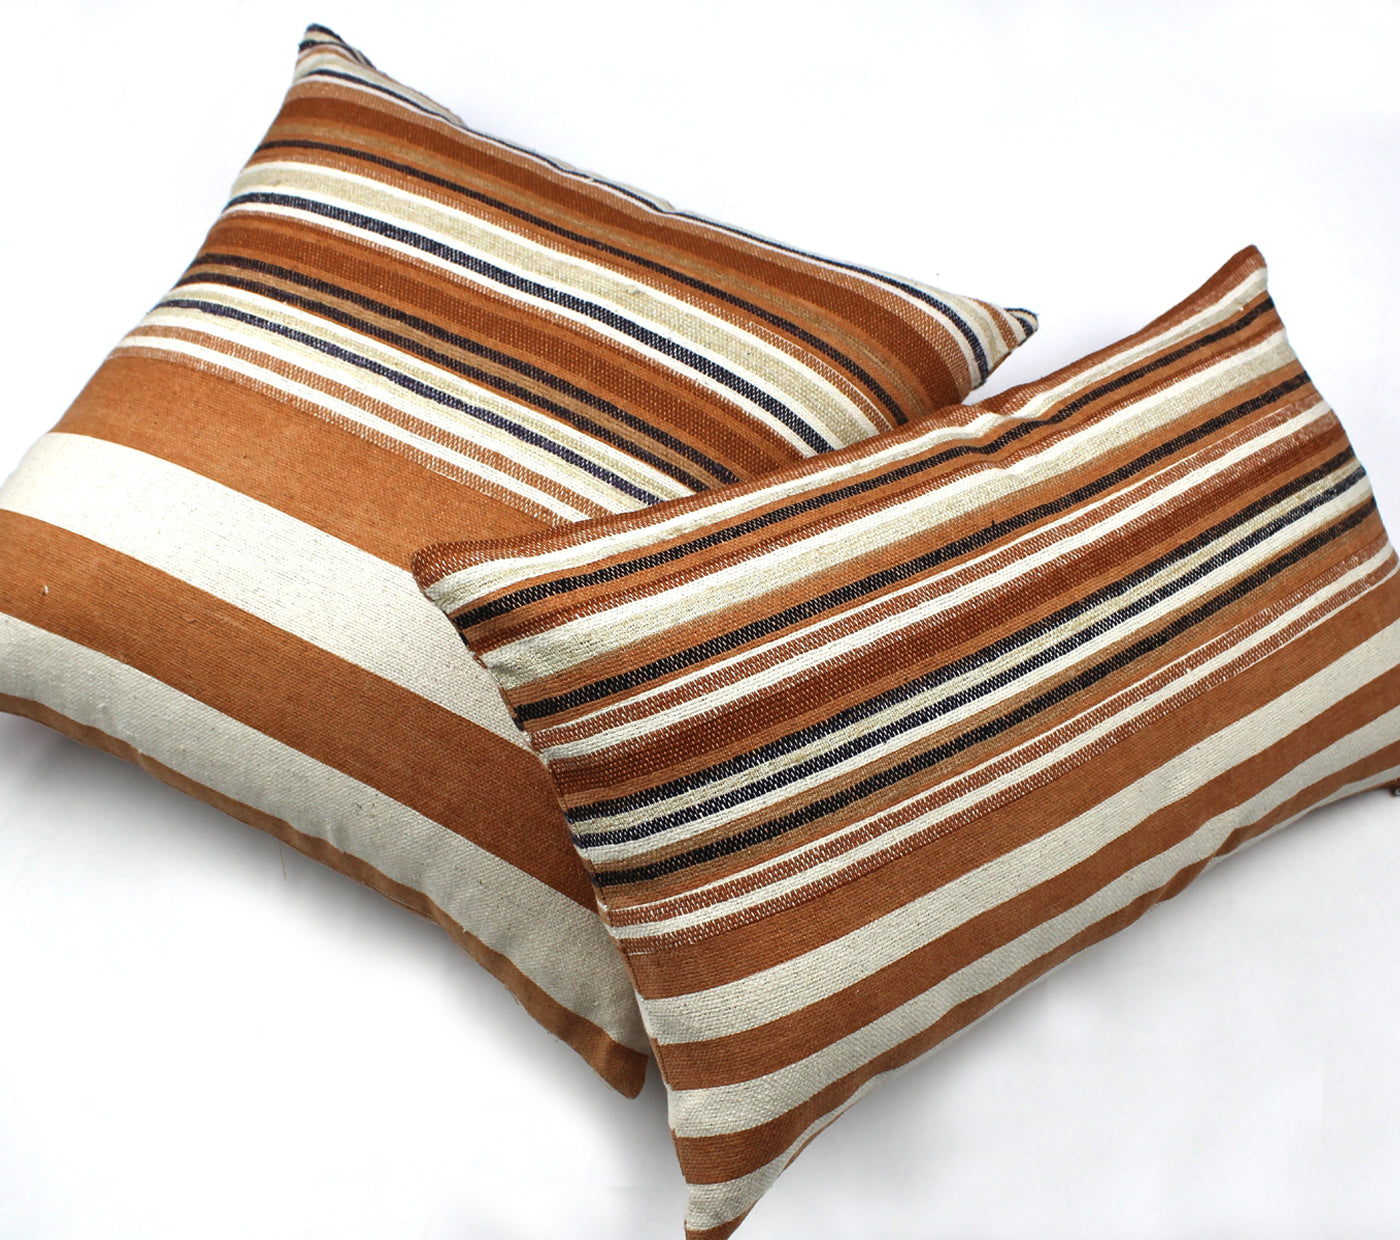 Handloom Woven Rust Striped Cushion Cover Size 45X45Cms